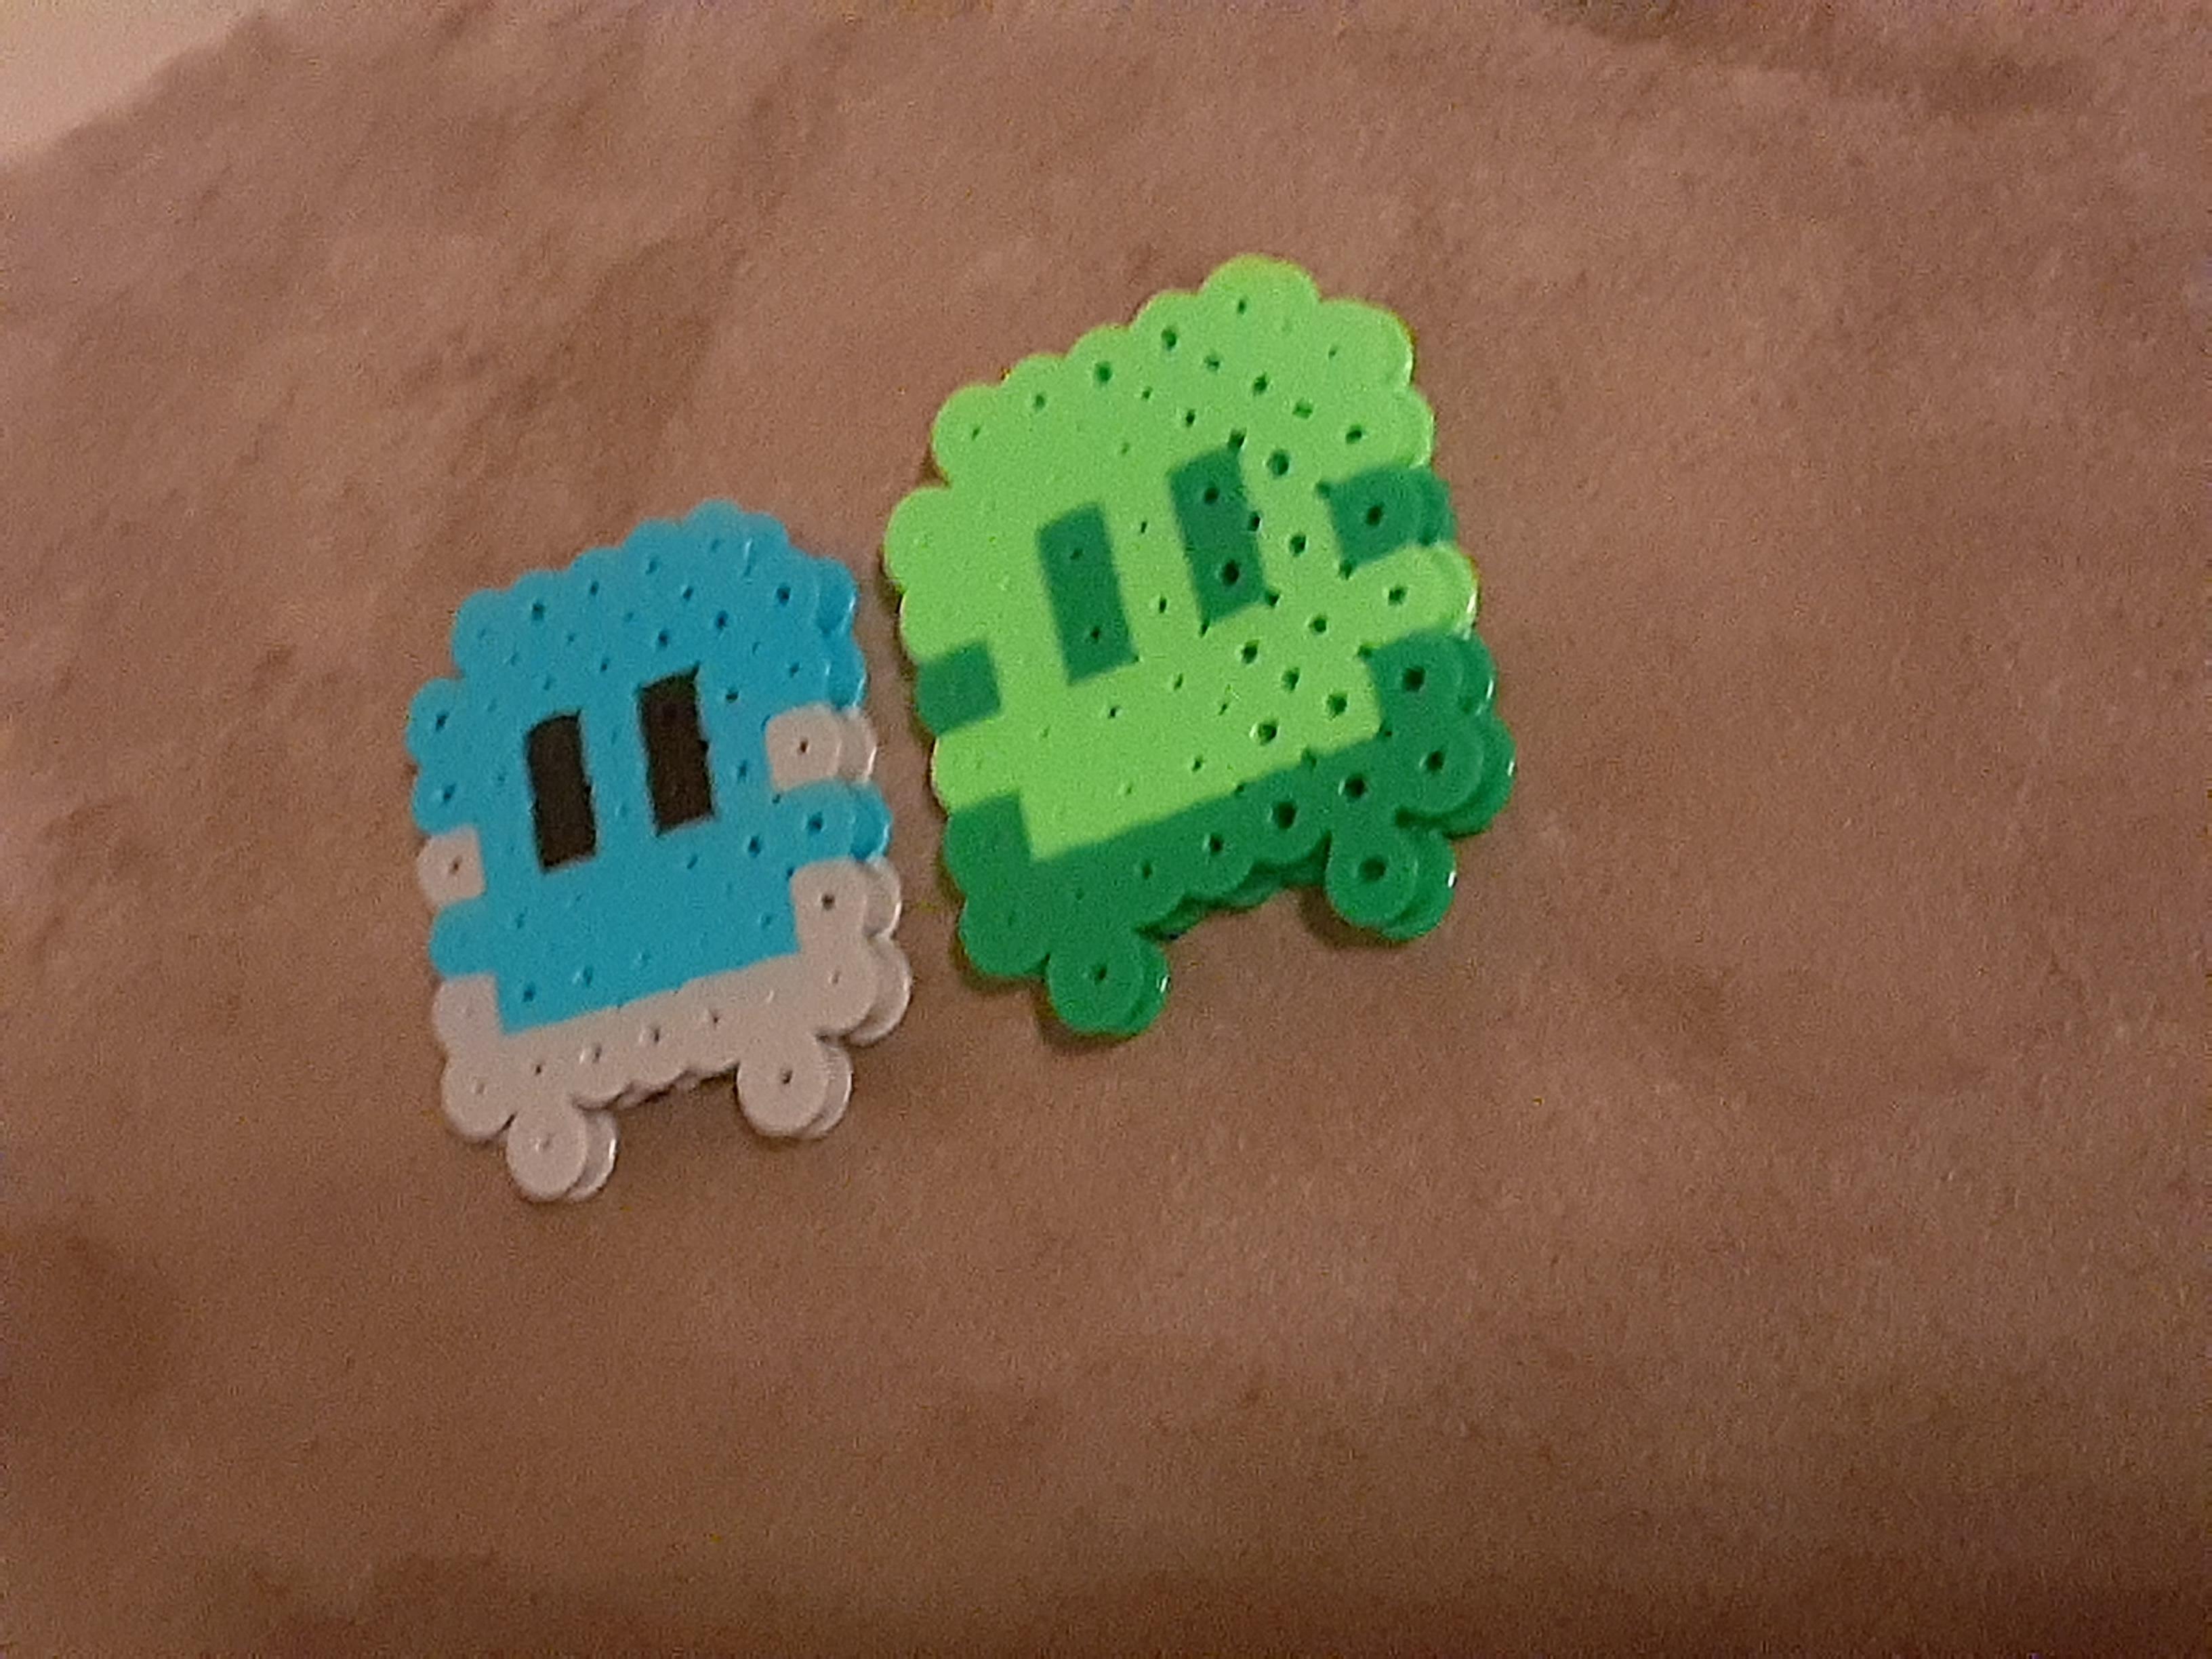 The main character of Just One Boss and their reflection recreated using Perler beads.